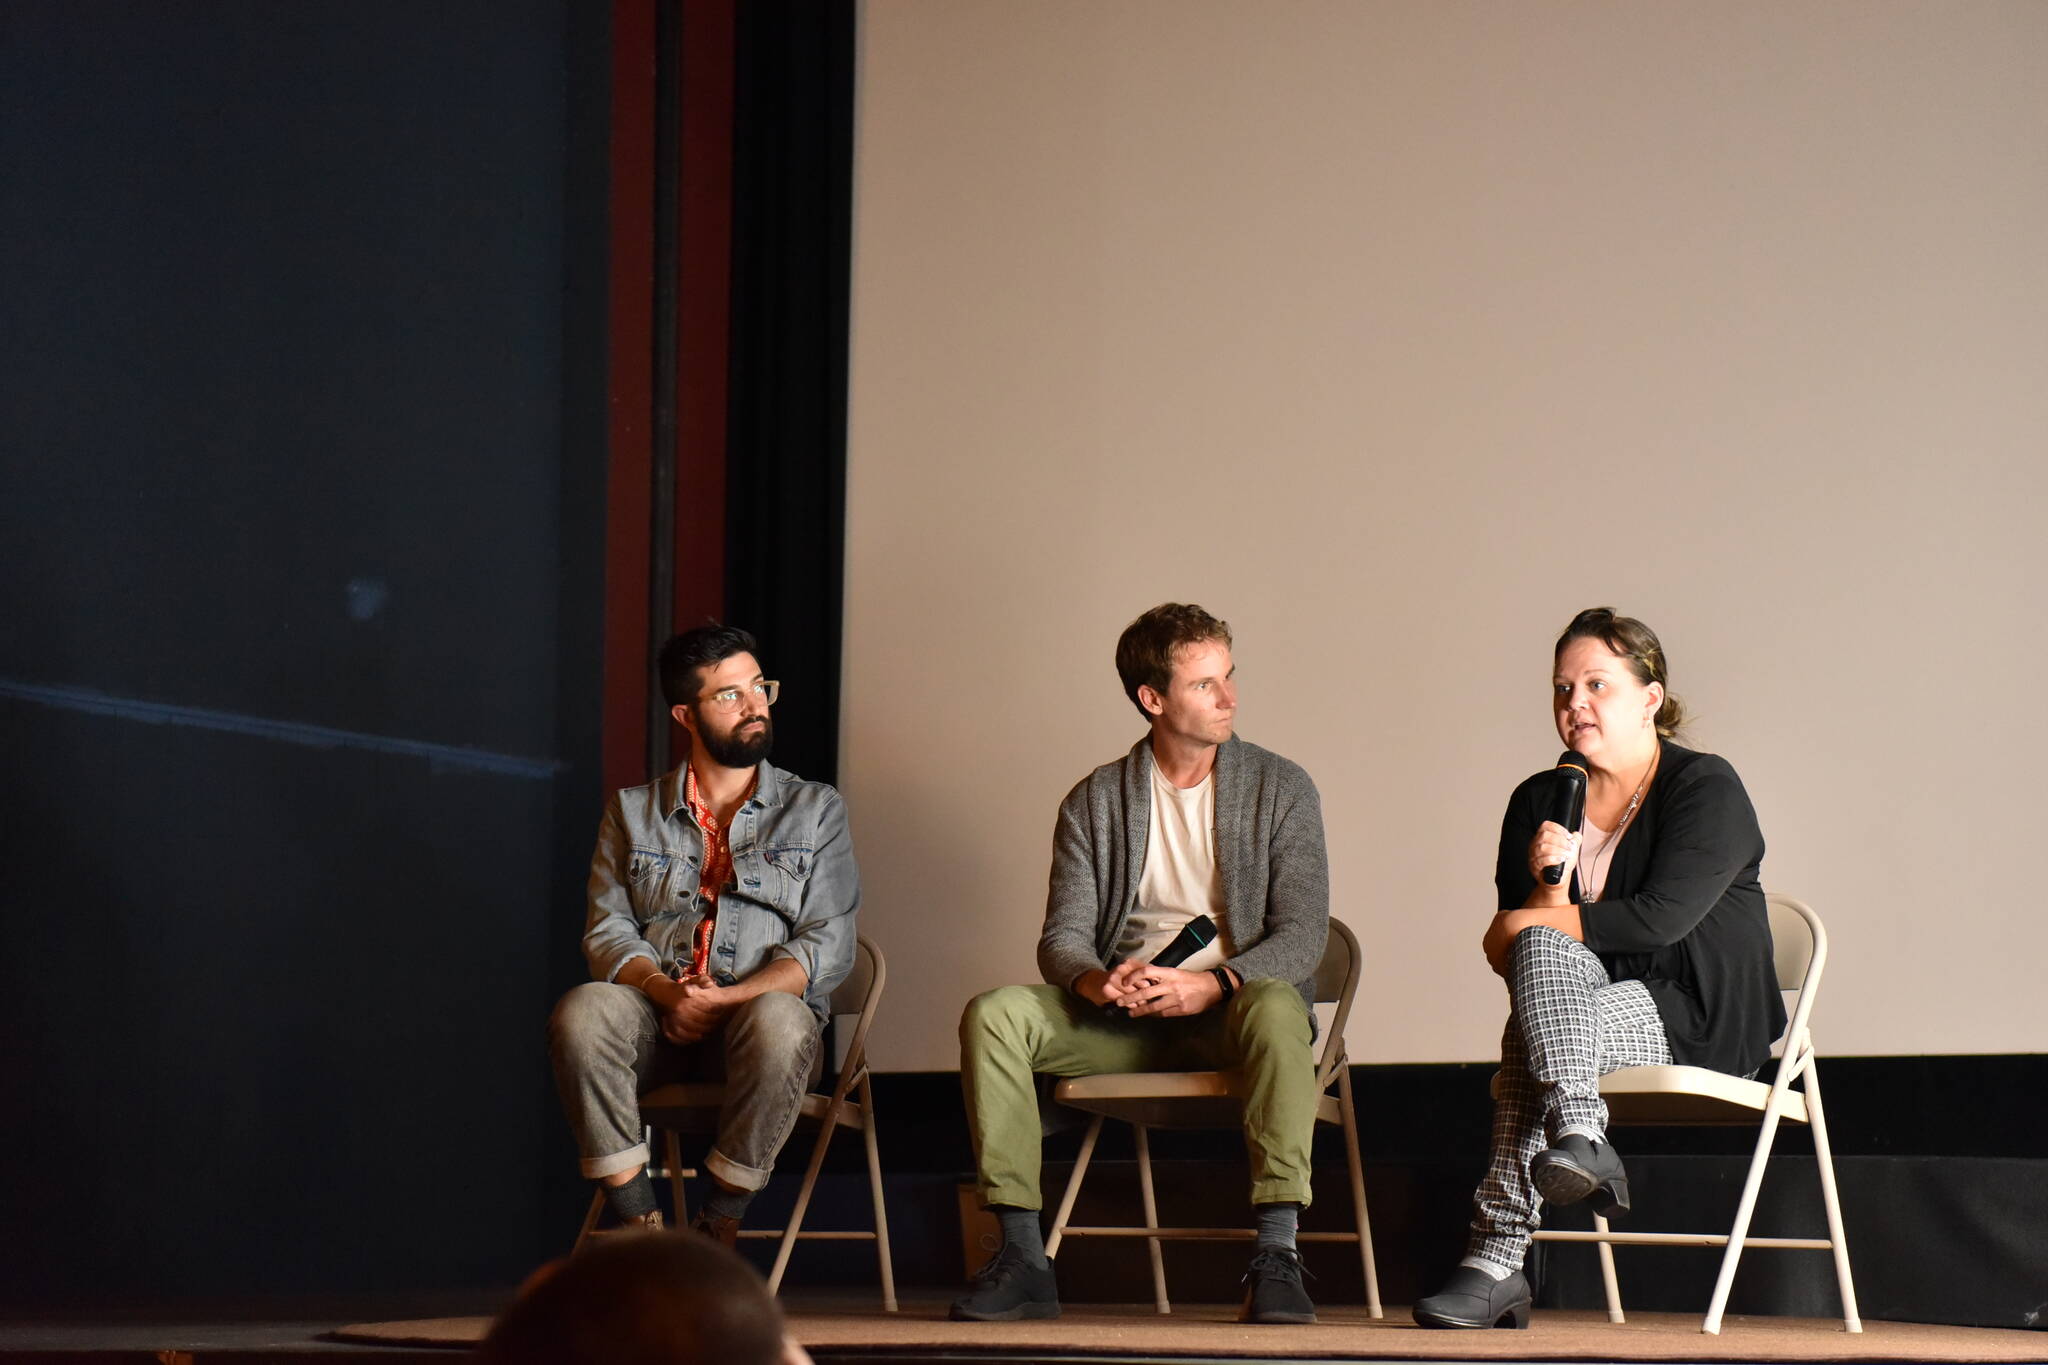 Filmmakers Zach Ignasci and Chris Temple answer questions with state Rep. Tarra Simmons during a panel discussion after the premiere of "Free to Care" at the Lynwood Theatre.